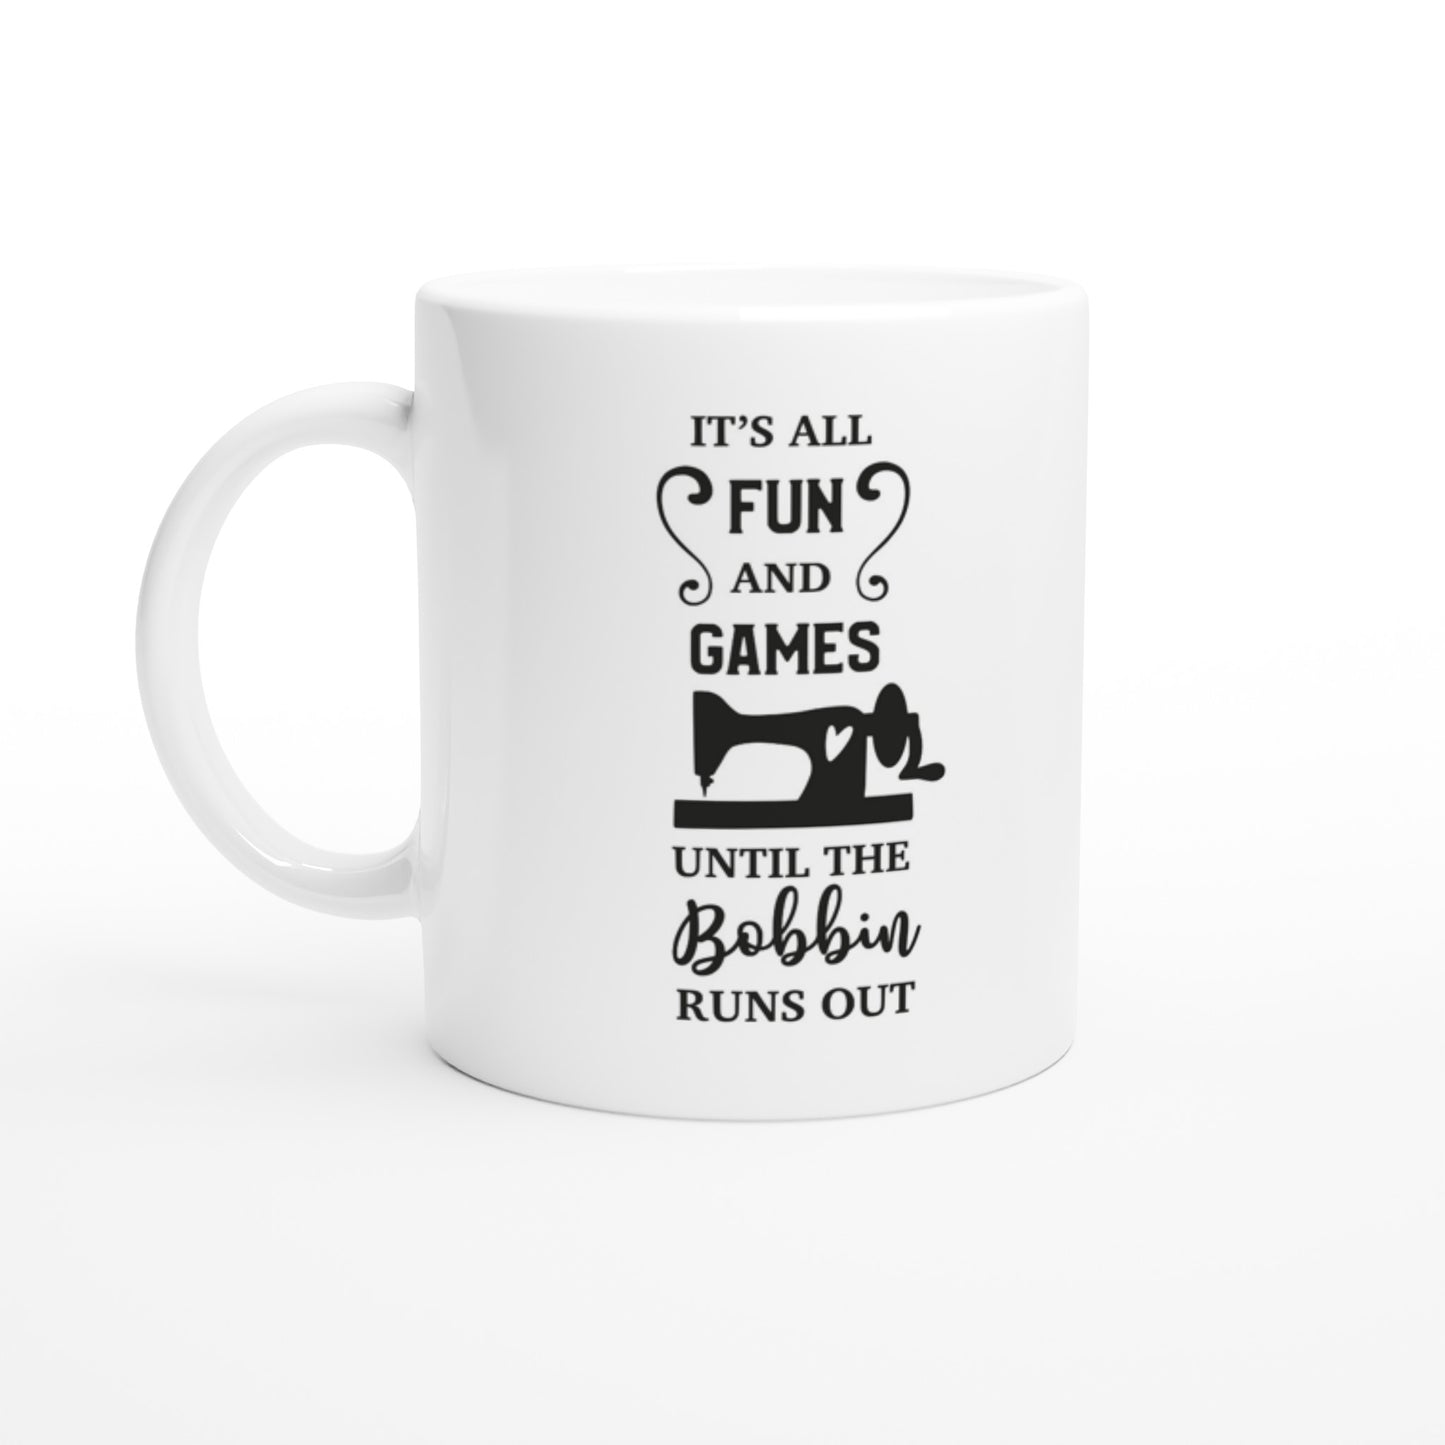 It's All Fun and Games Until the Bobbin Runs Out - Quilters Gift - White 11oz Ceramic Mug